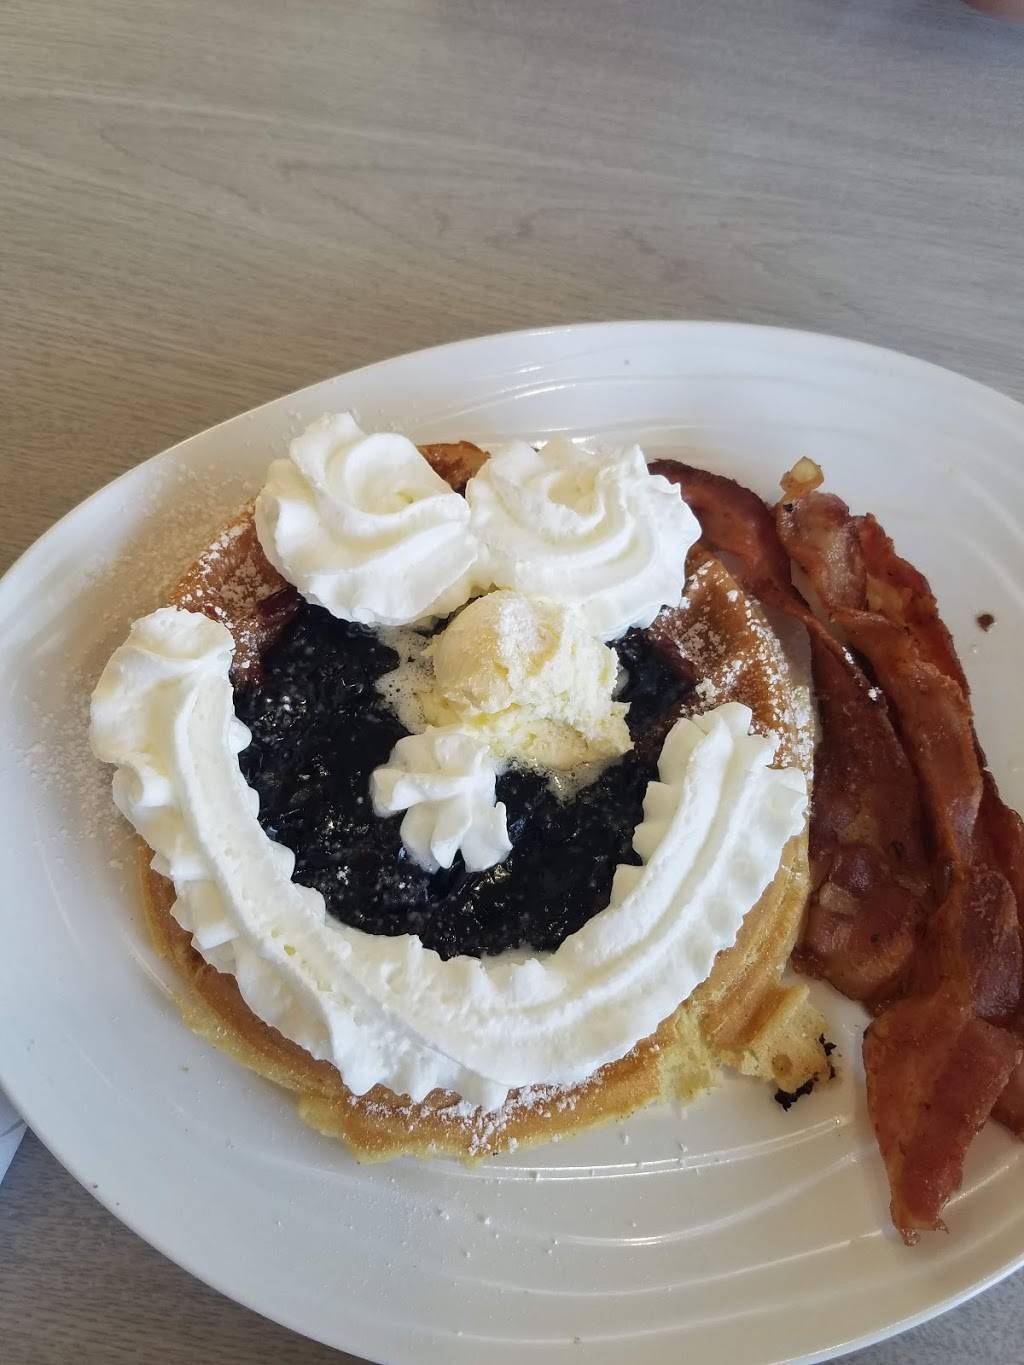 The House Of Pancakes | restaurant | 41734 Hayes Rd, Clinton Twp, MI 48038, USA | 5862866200 OR +1 586-286-6200